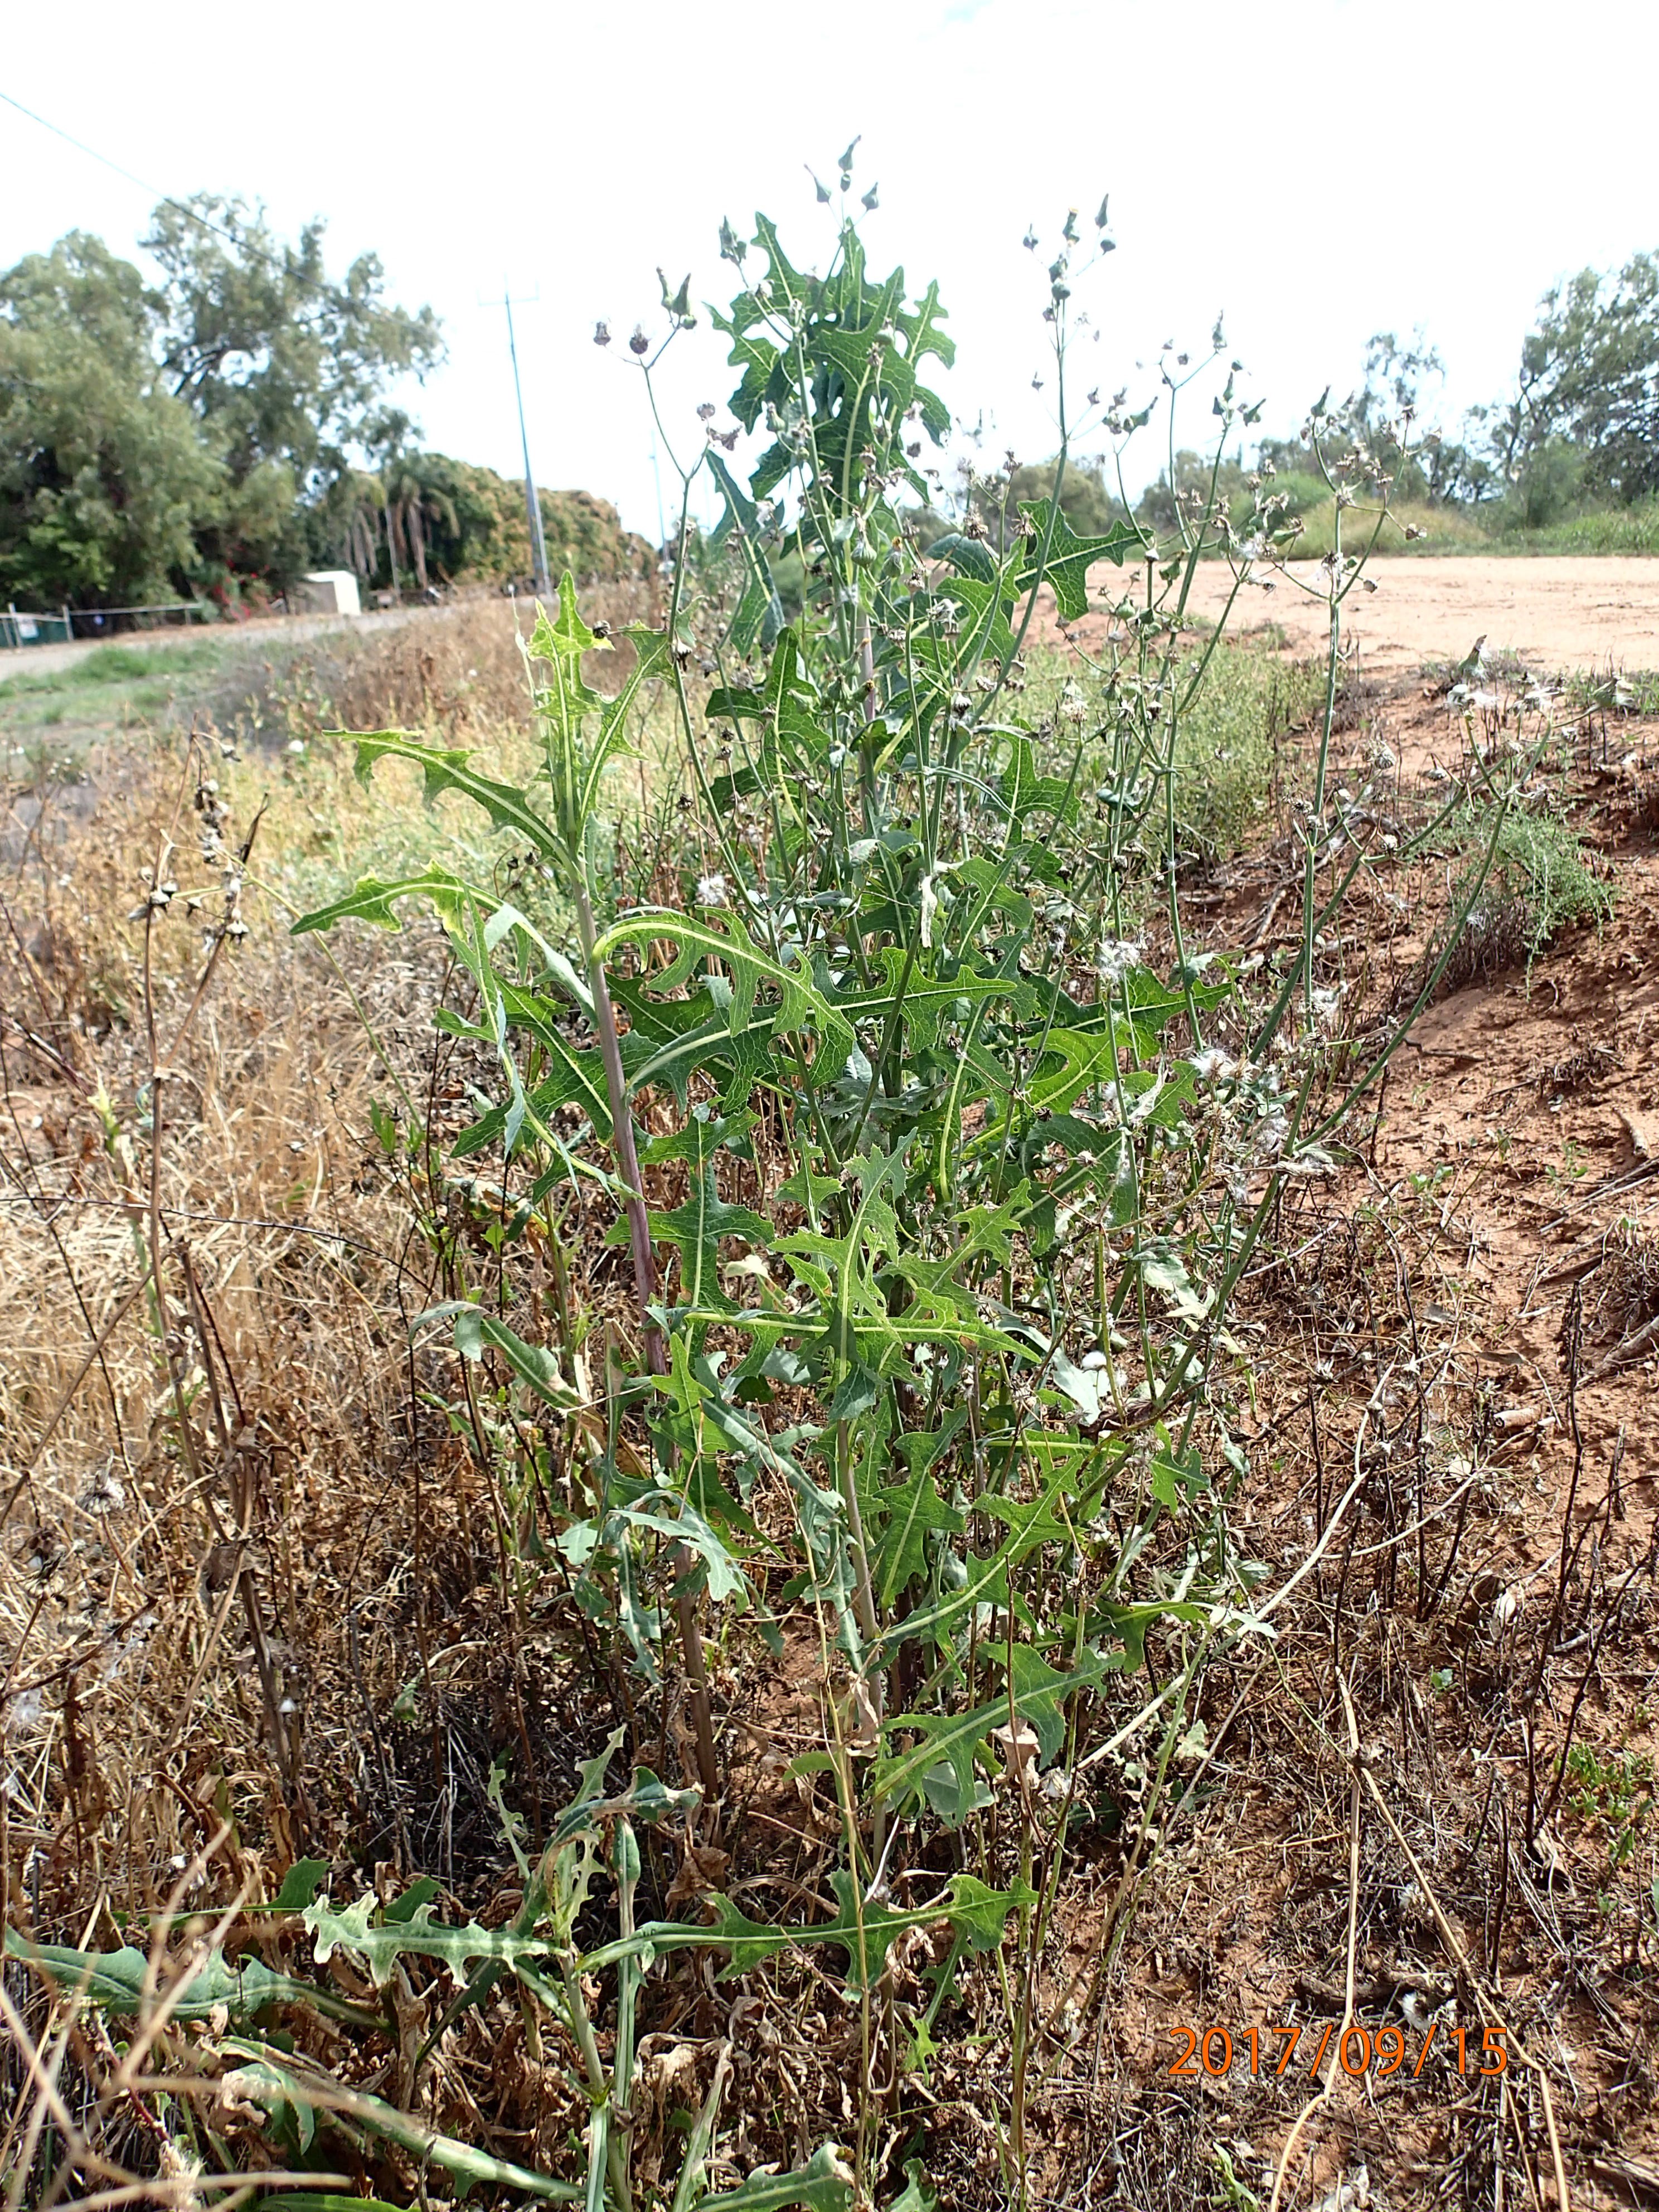 Mature plants of willow-leaved lettuce growing in an unsprayed area in the Gascoyne irrigated region of Western Australia